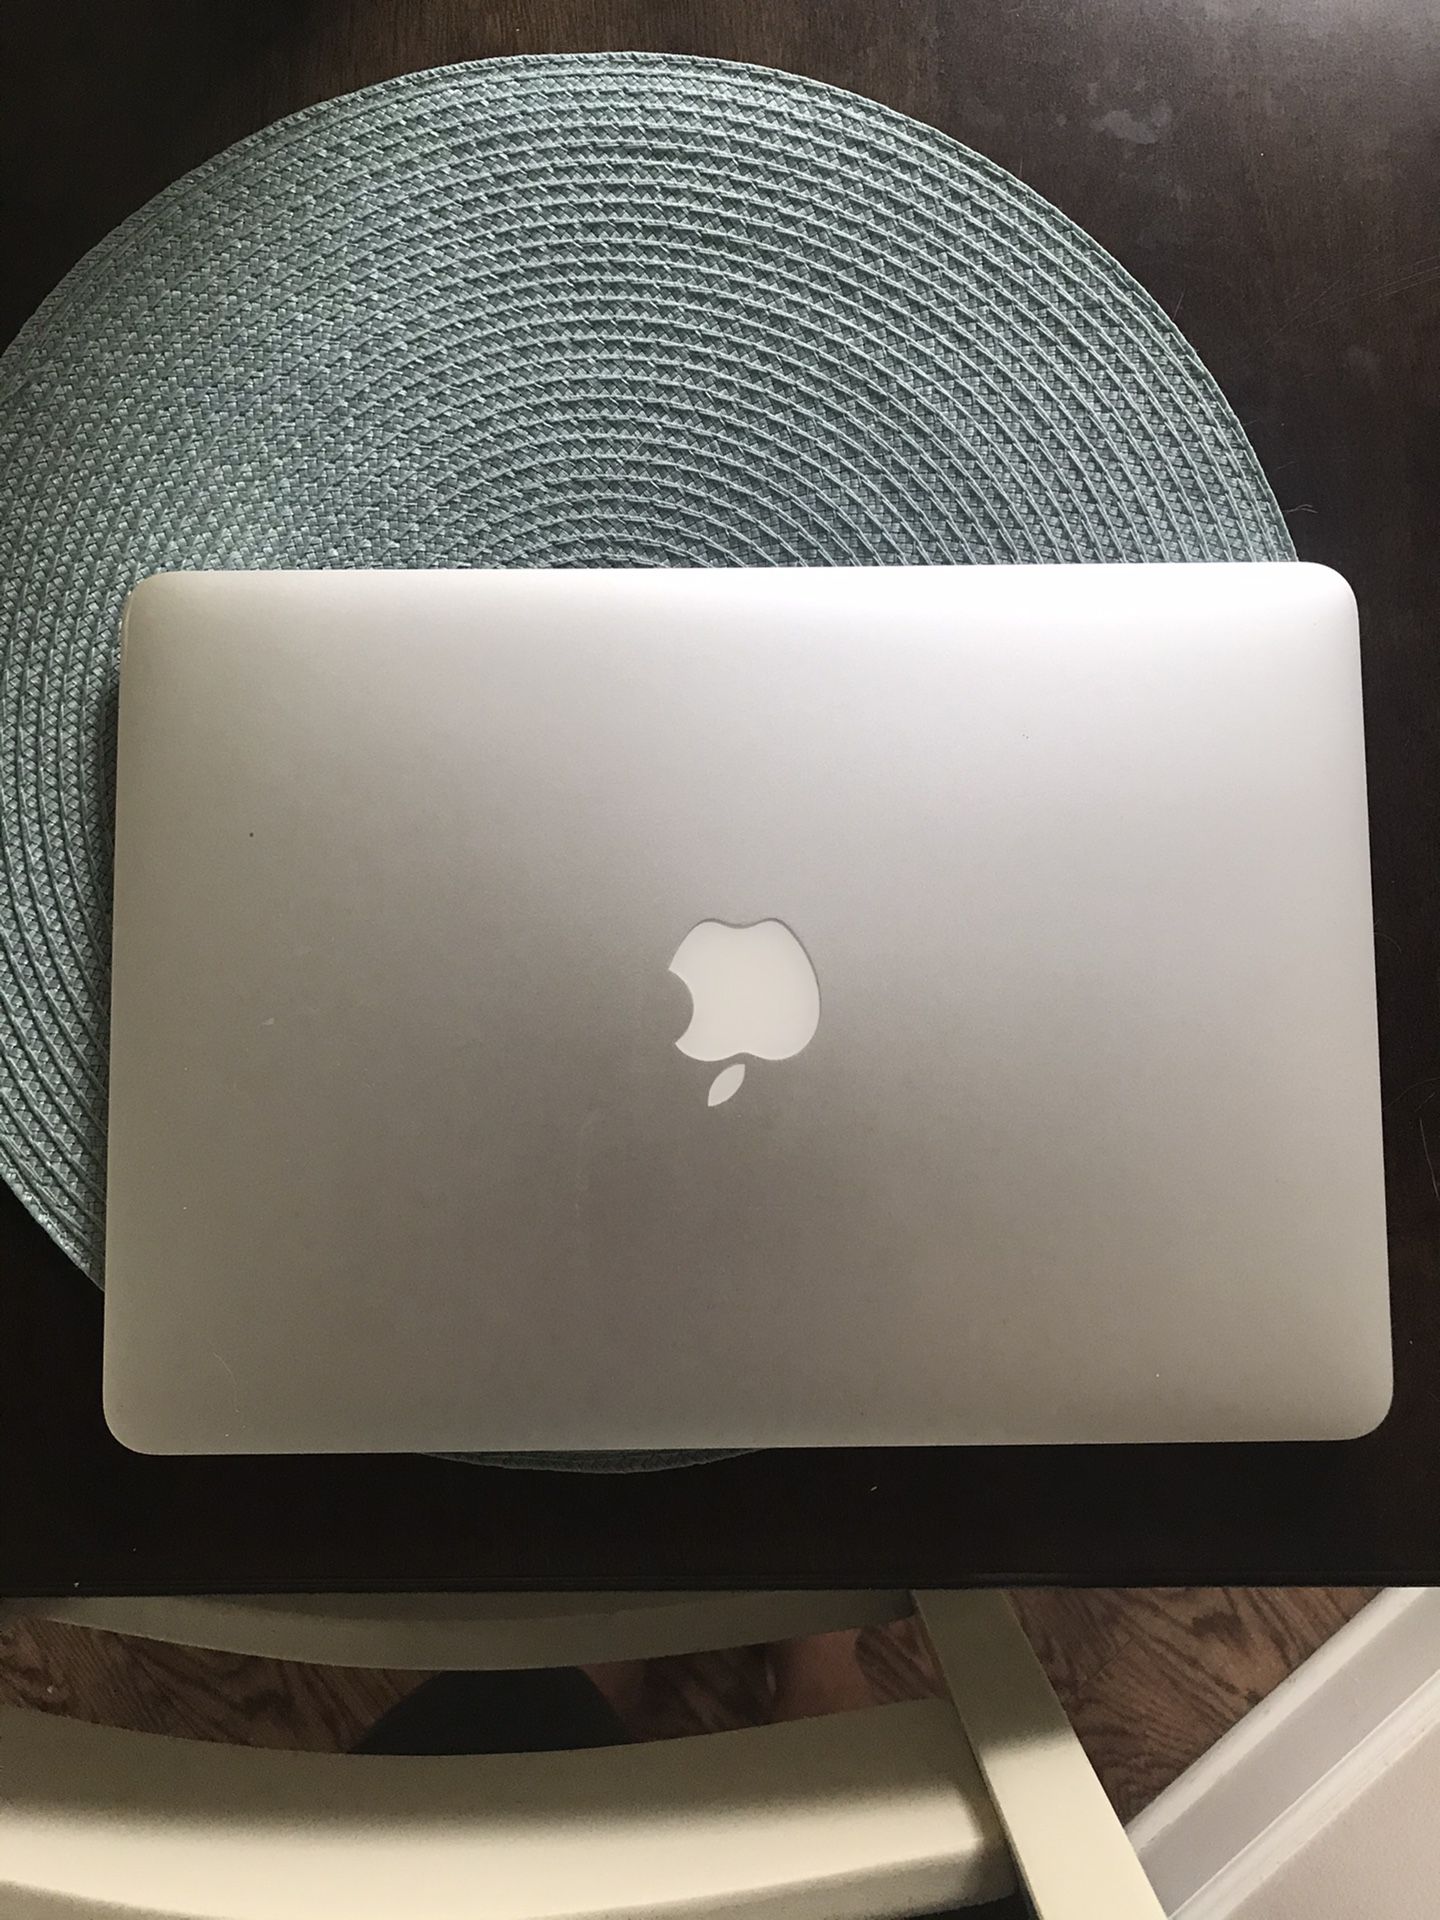 13” mid/late 2015 MacBook Pro (Start-Up Issue)